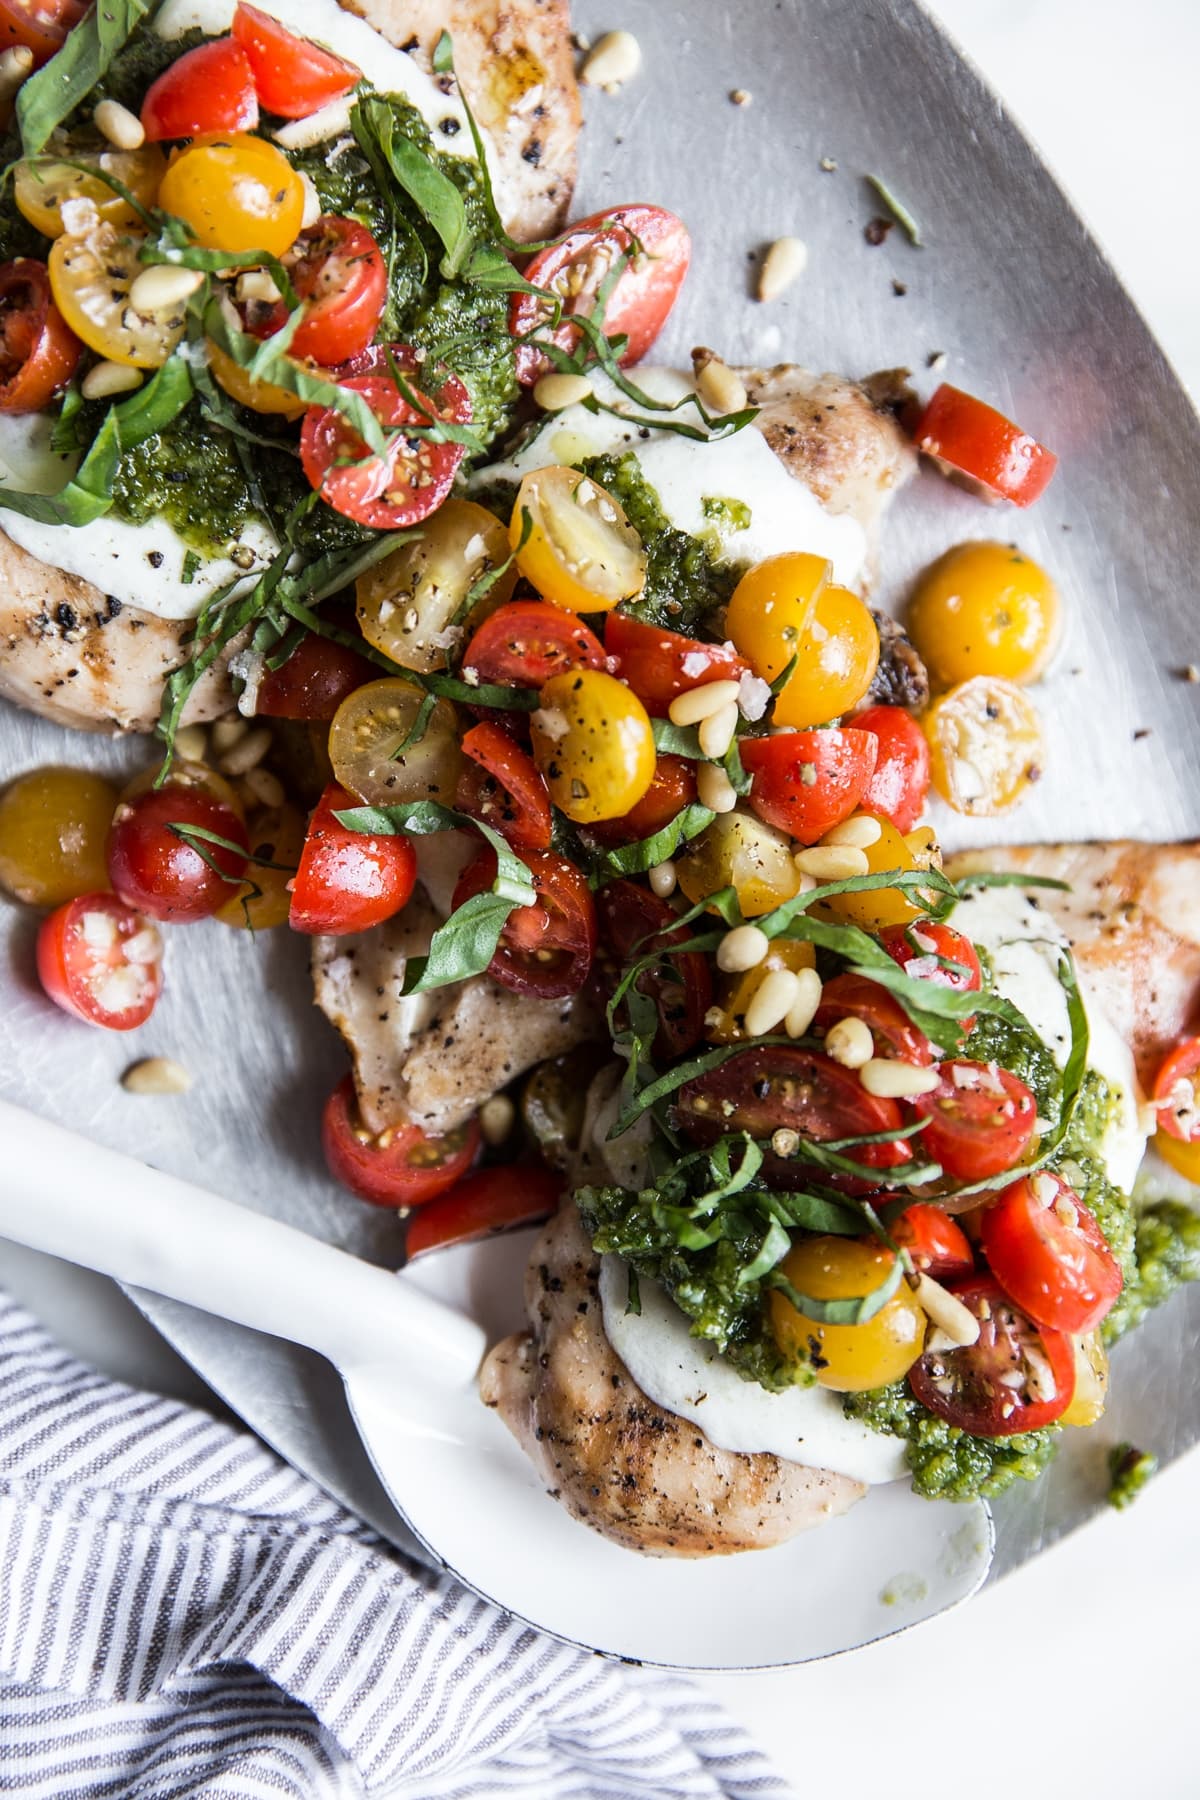 Pesto chicken bruschetta with cherry tomatoes, basil and pine nuts on a plate